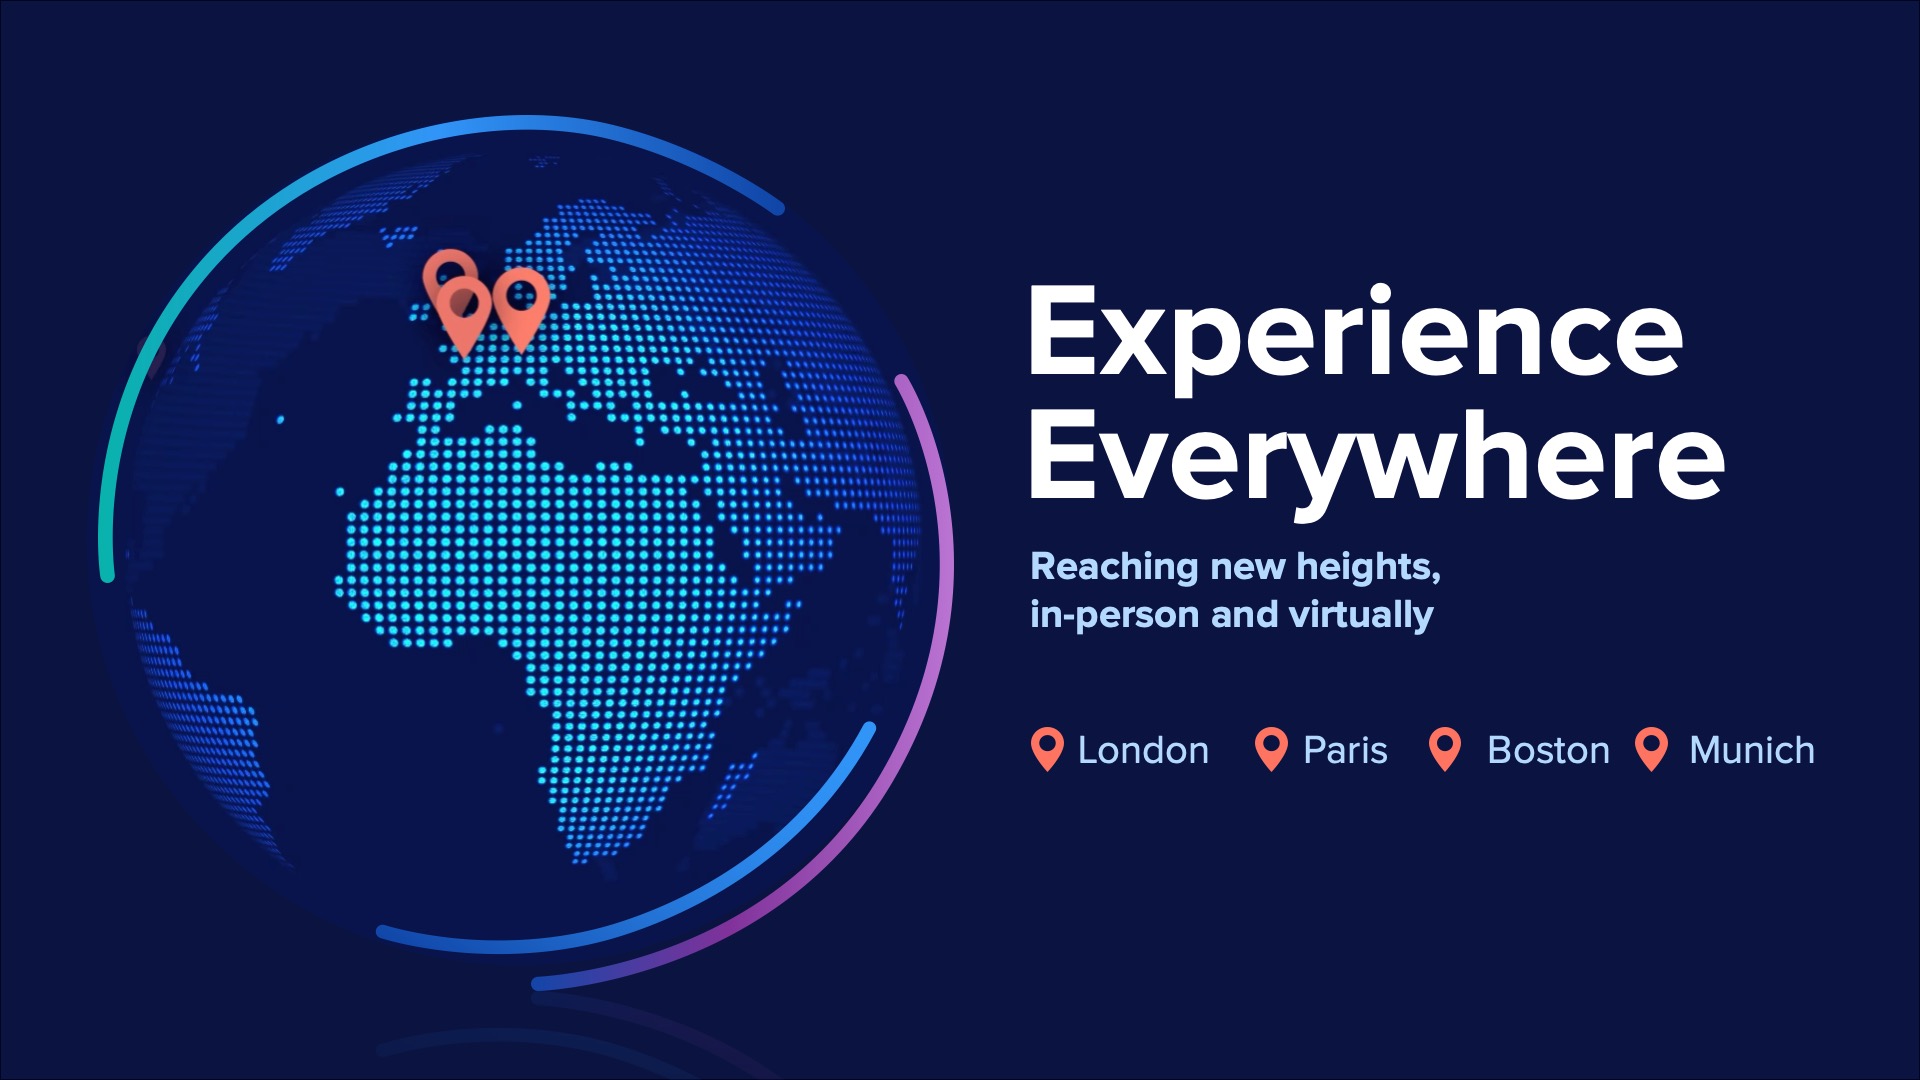 A slide design from the Nexthink Experience everywhere event. It shows the locations of the four event locations on a globe.